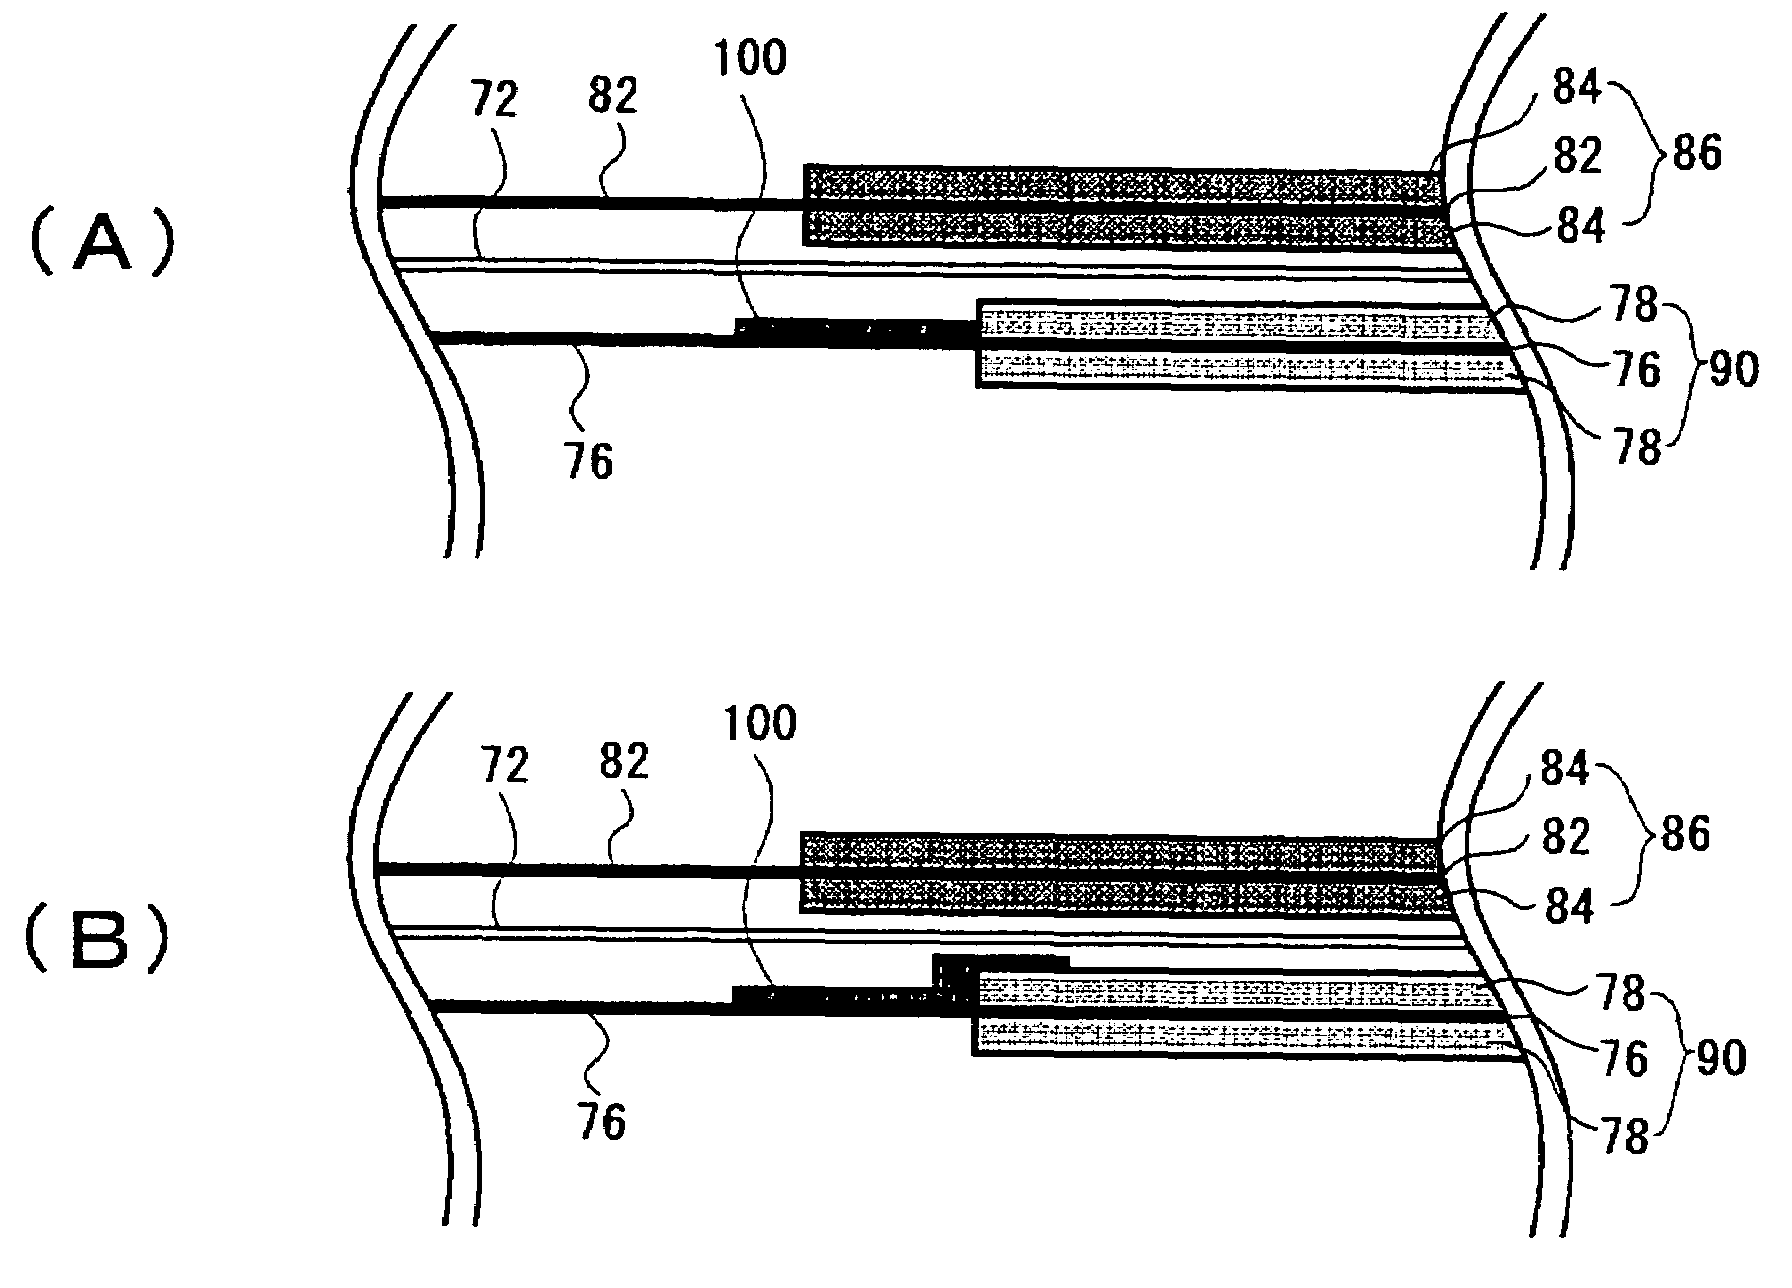 Non-aqueous electrolyte secondary battery and manufacturing methods of an electrode used therein